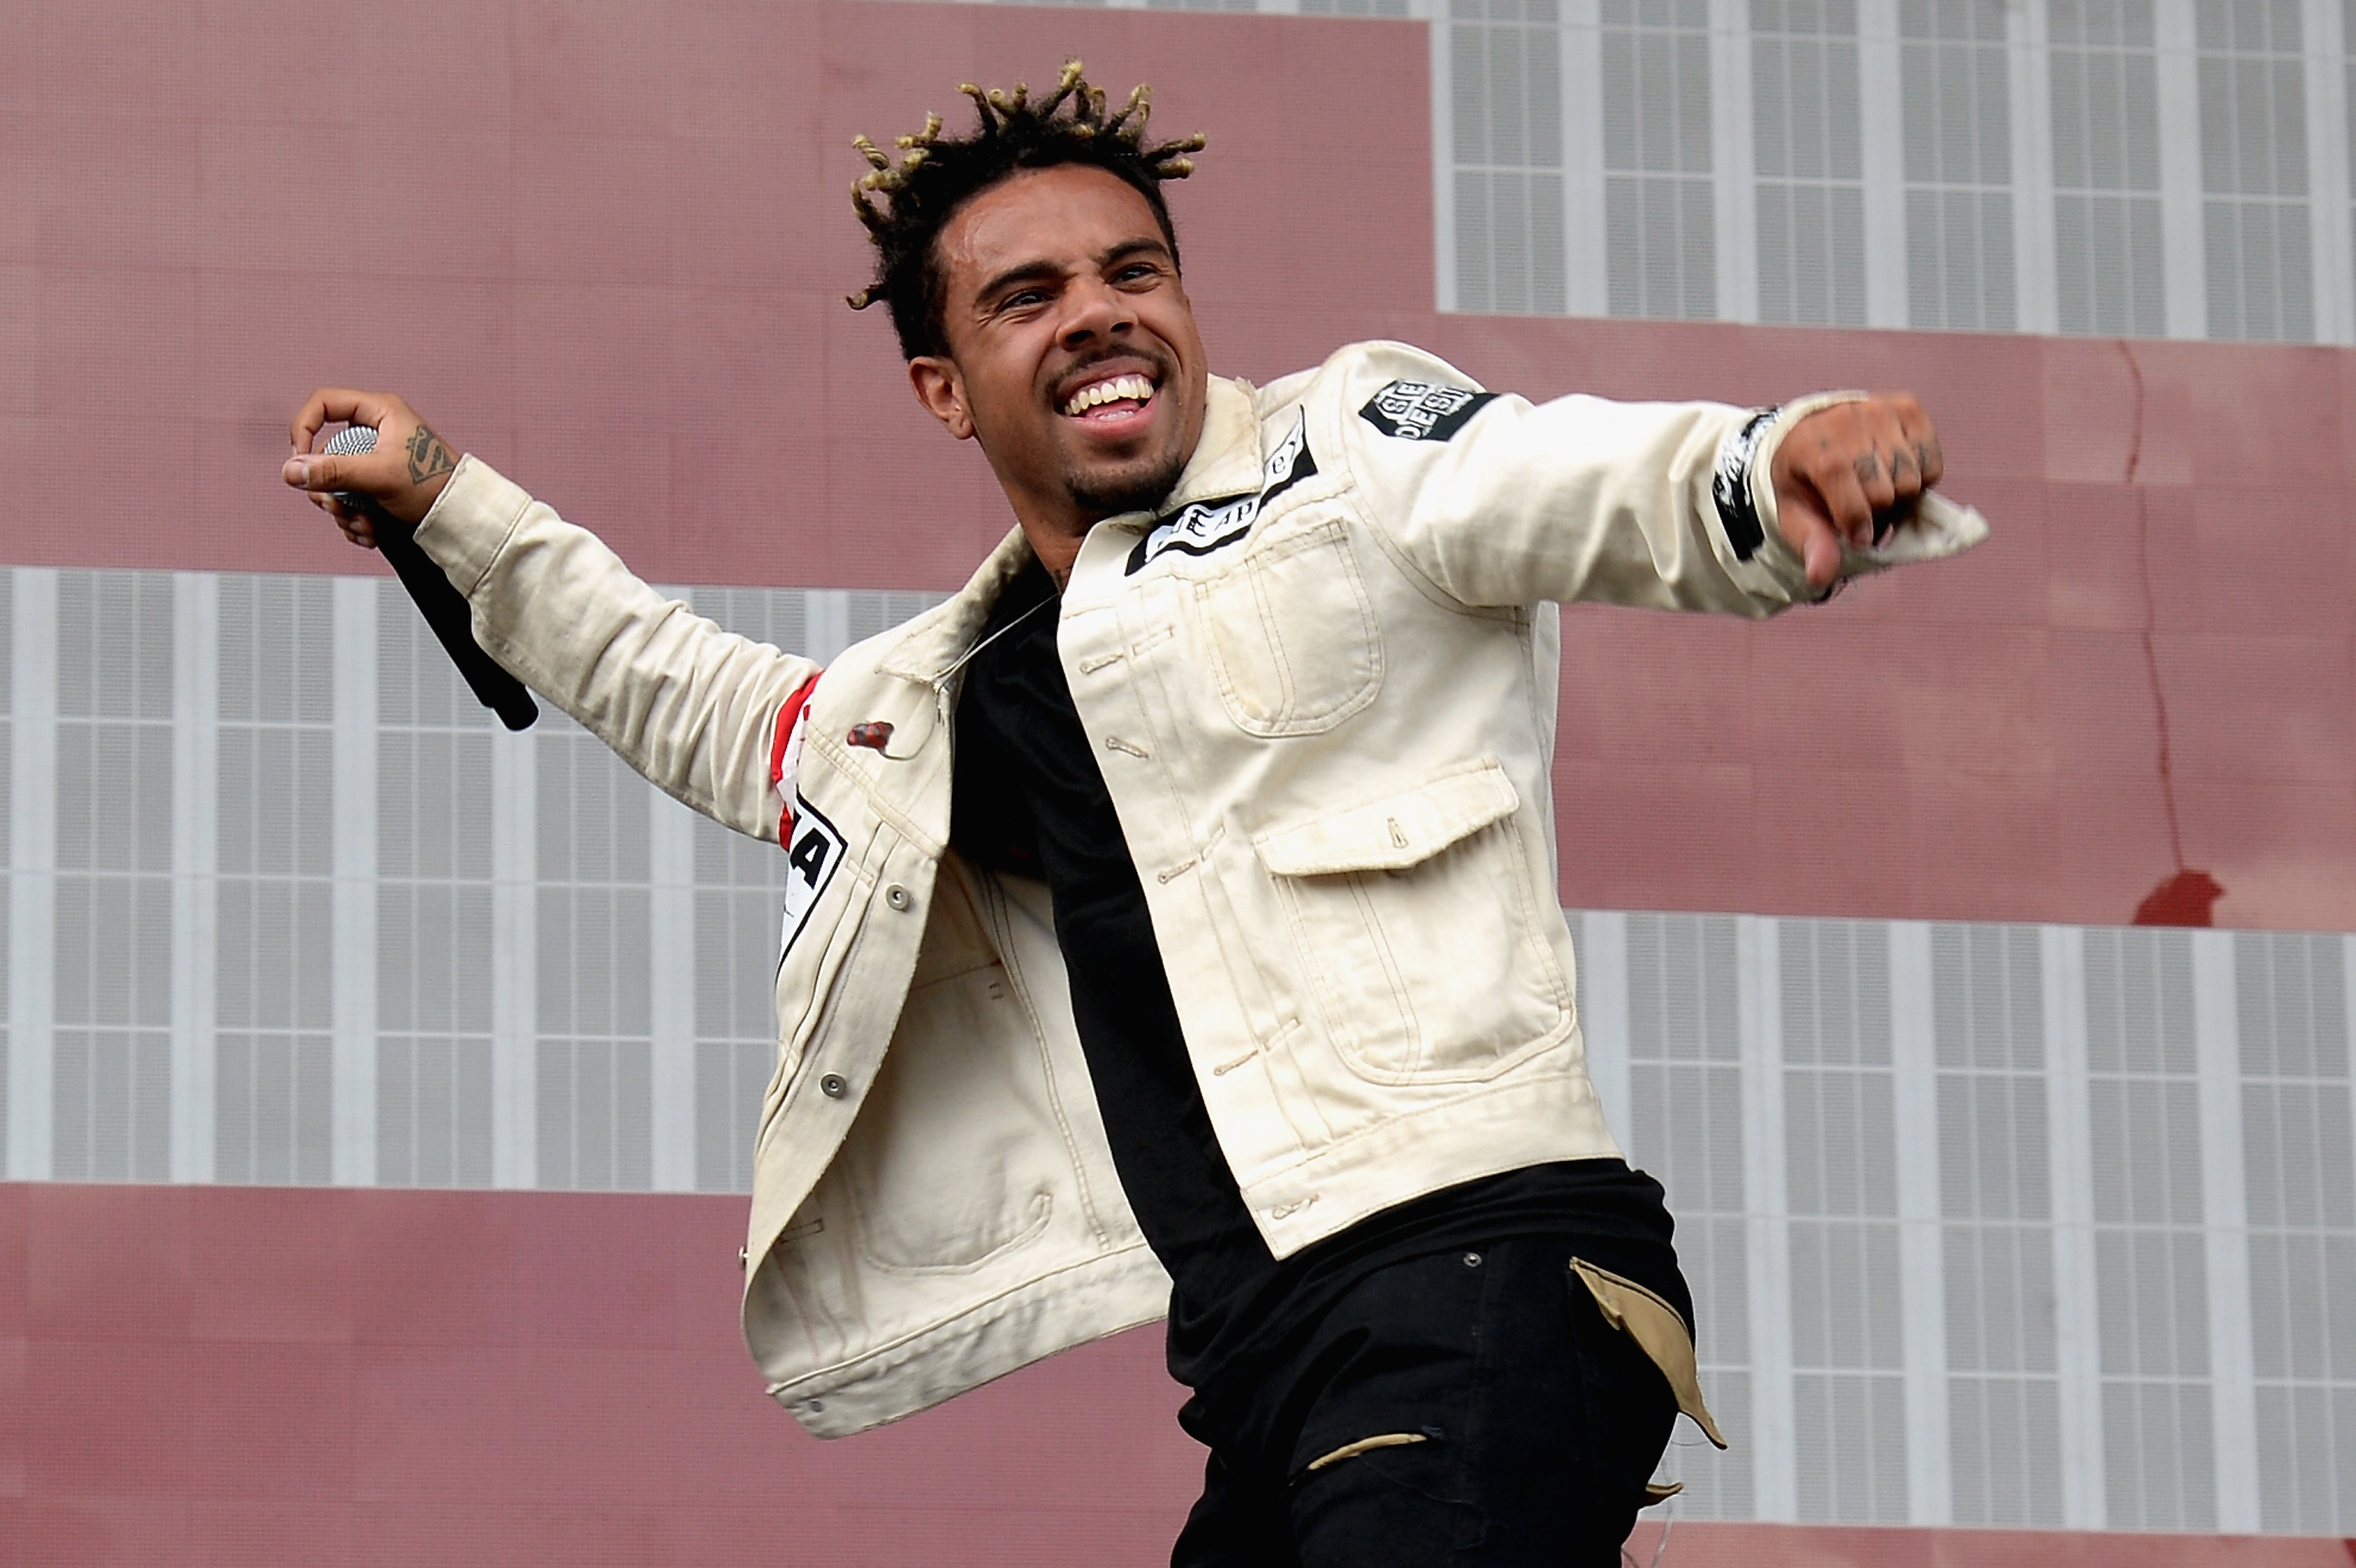 PHILADELPHIA, PA - SEPTEMBER 05: Vic Mensa performs onstage during the 2015 Budweiser Made in America Festival at Benjamin Franklin Parkway on September 5, 2015 in Philadelphia, Pennsylvania. (Photo by Kevin Mazur/Getty Images for Anheuser-Busch)